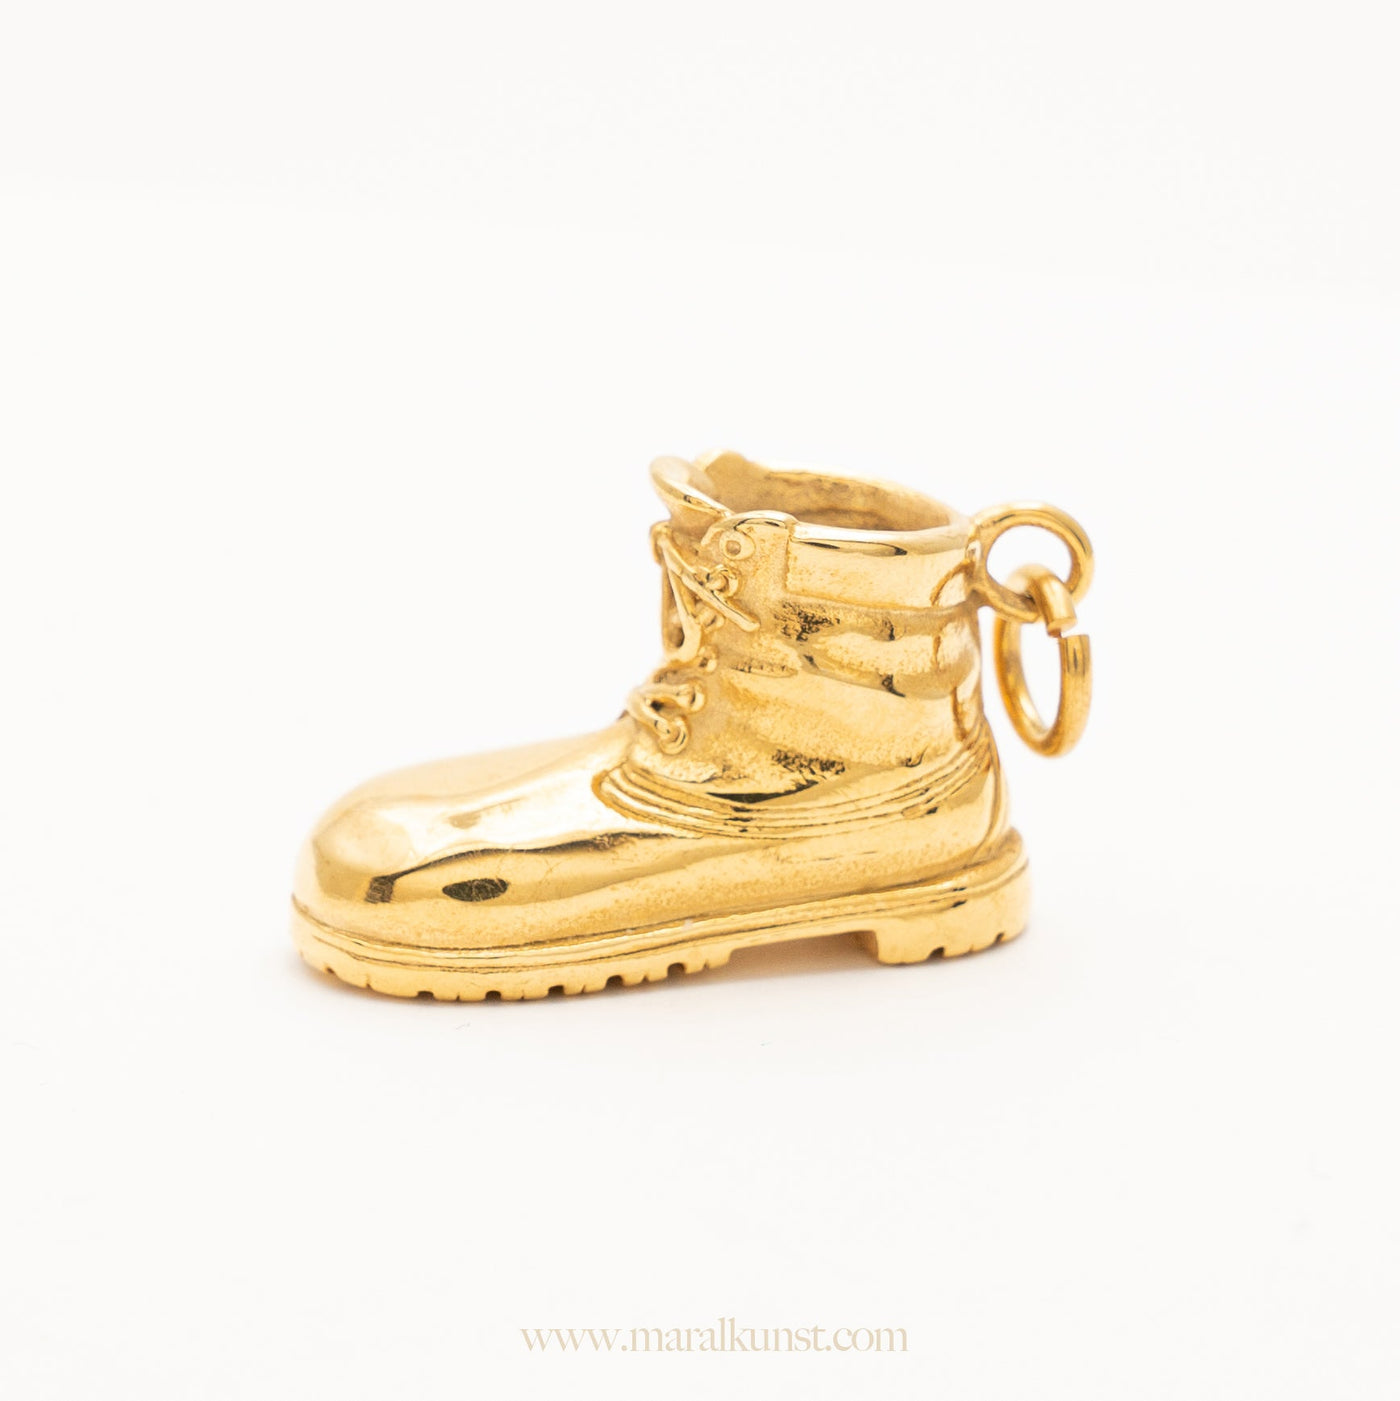 Gold plated steel Shoes Pendant - Maral Kunst Jewelry